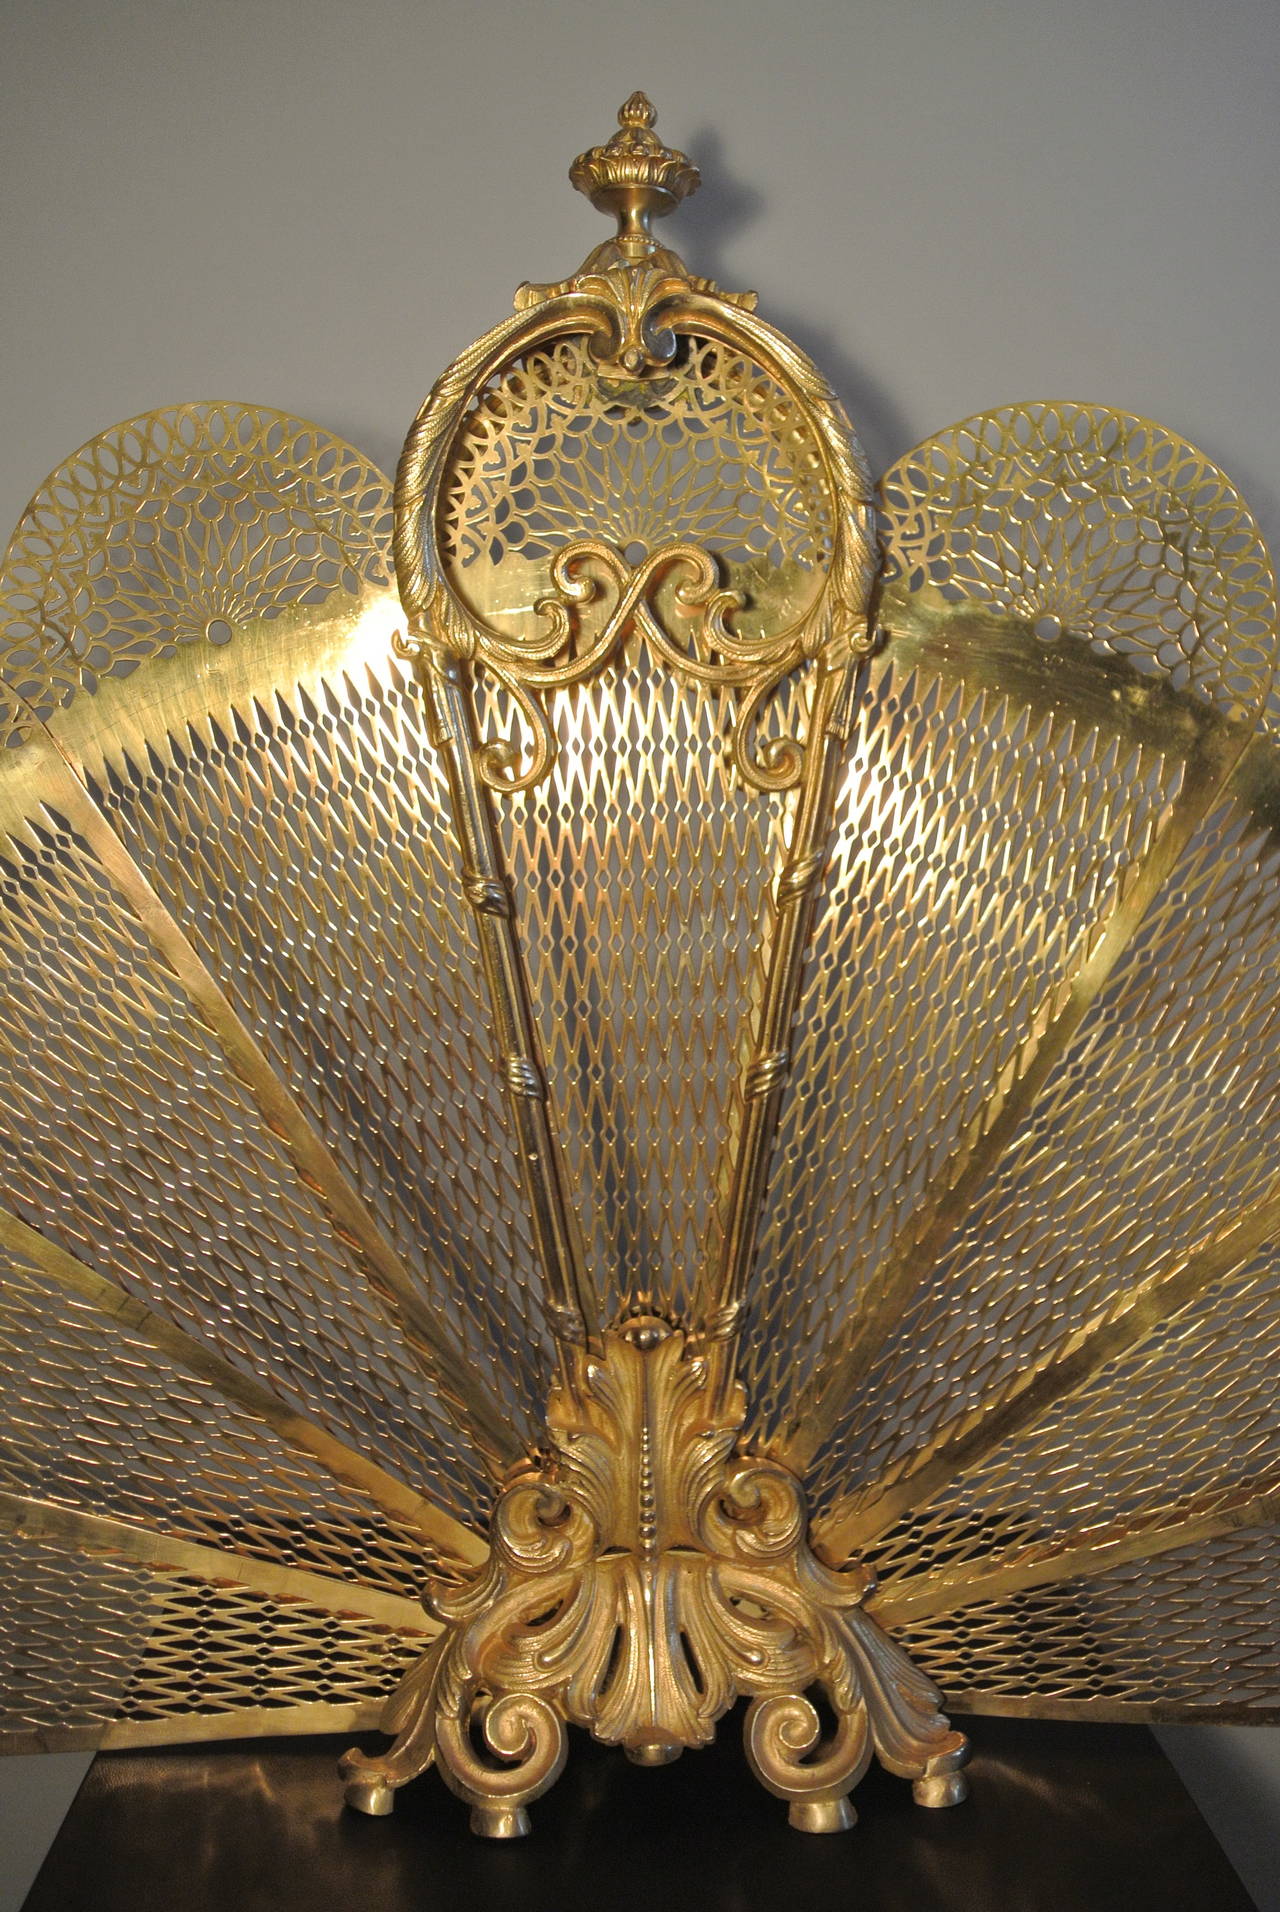 Exceptional quality bronze dore fire place screen in a peacock fan design, Napoleon III, 19th Century. 62cm Tall x 102 cm Wide.